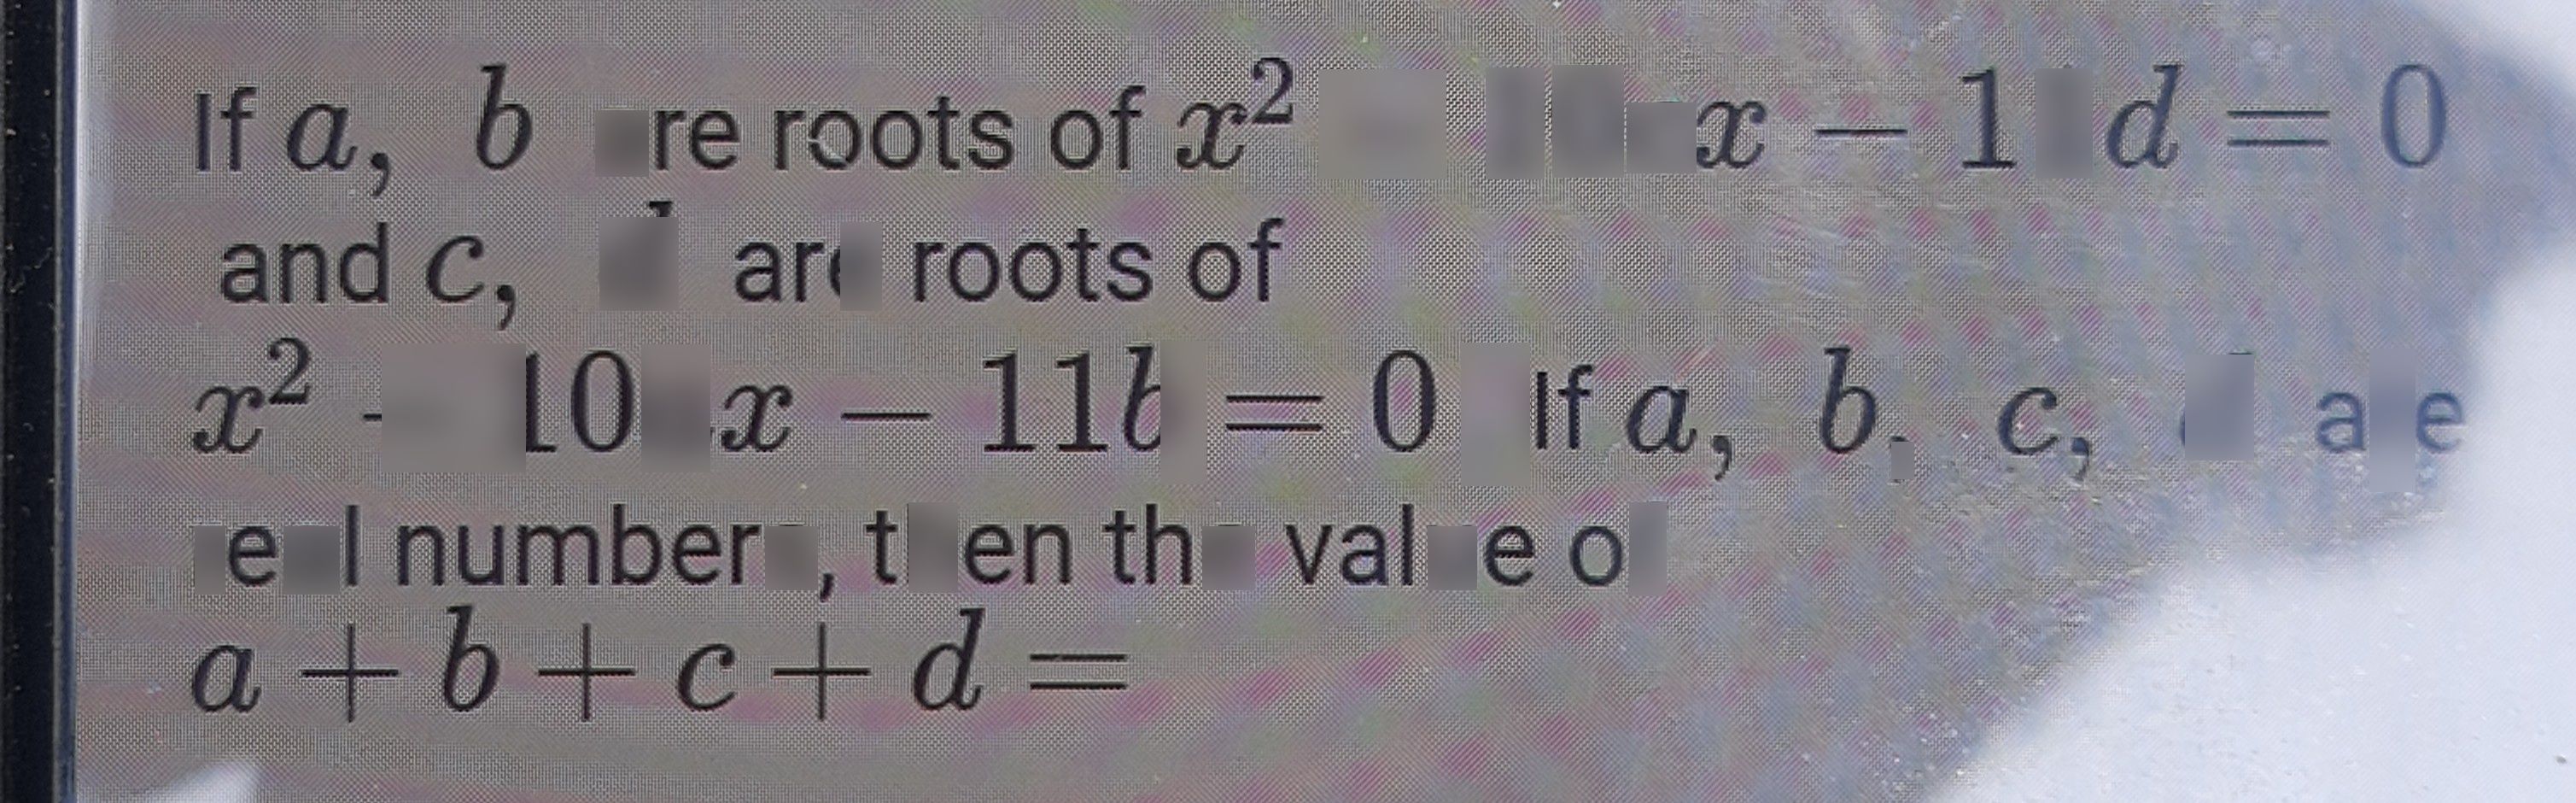 search-thumbnail-If $a,$ $b$ are roots of $x^{2}-10cx-11d=0$ 
and $C_{9}$ $a$ are roots of 
$x^{2}-10ax-$ 
$-10ax-11b=0$ If $a$ $b_{1}$ c, d are 
real numbers, then the value of 
$a+b+c+d=$ 